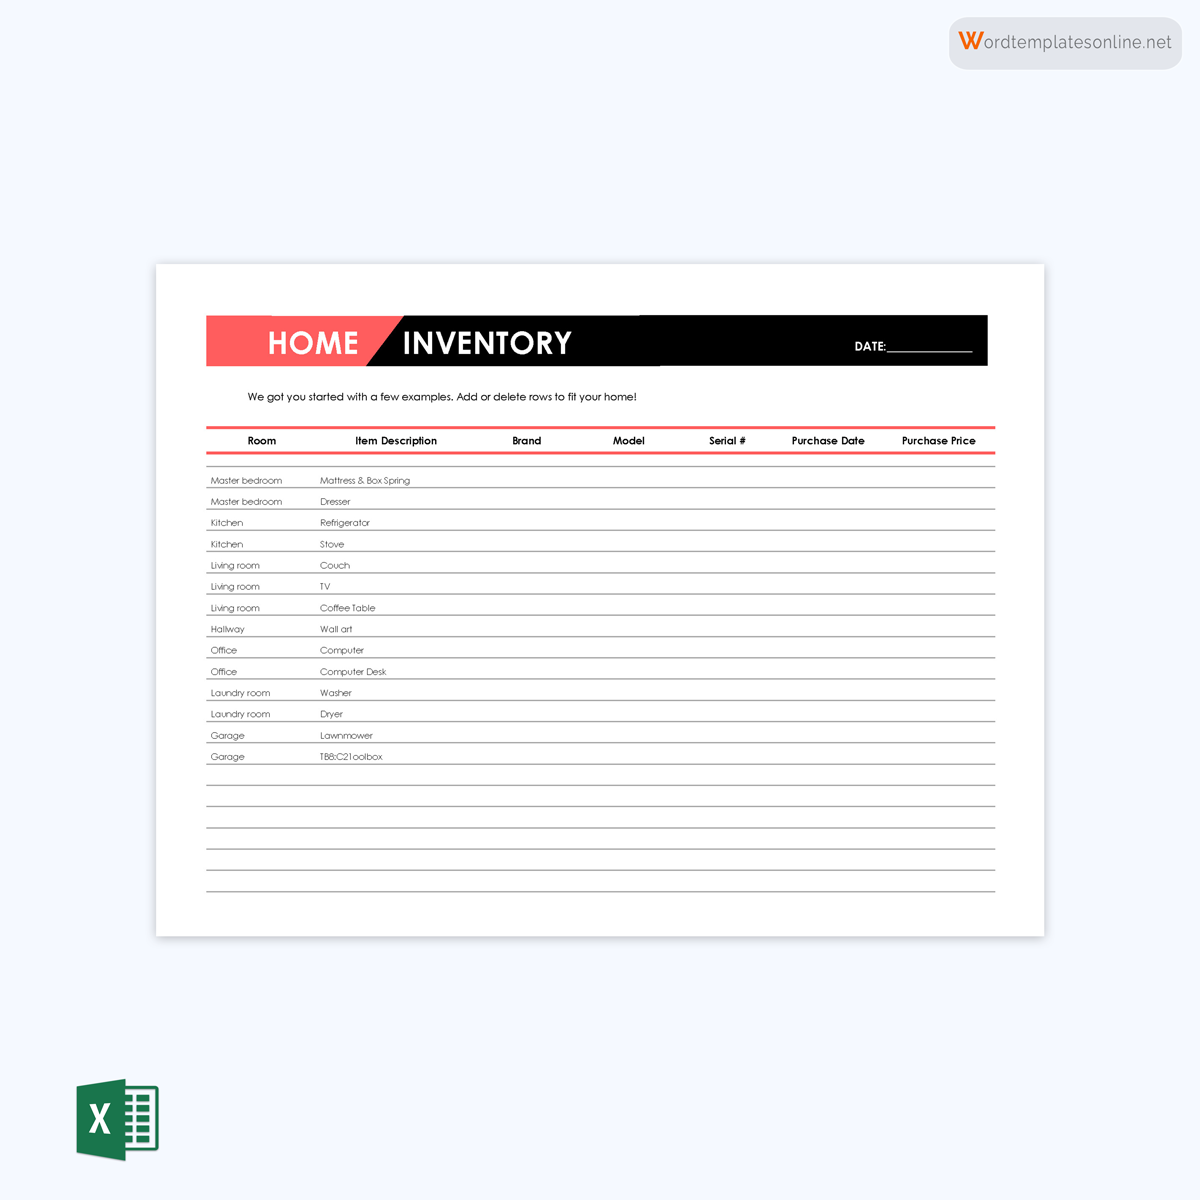 Inventory spreadsheet form example - Download now!